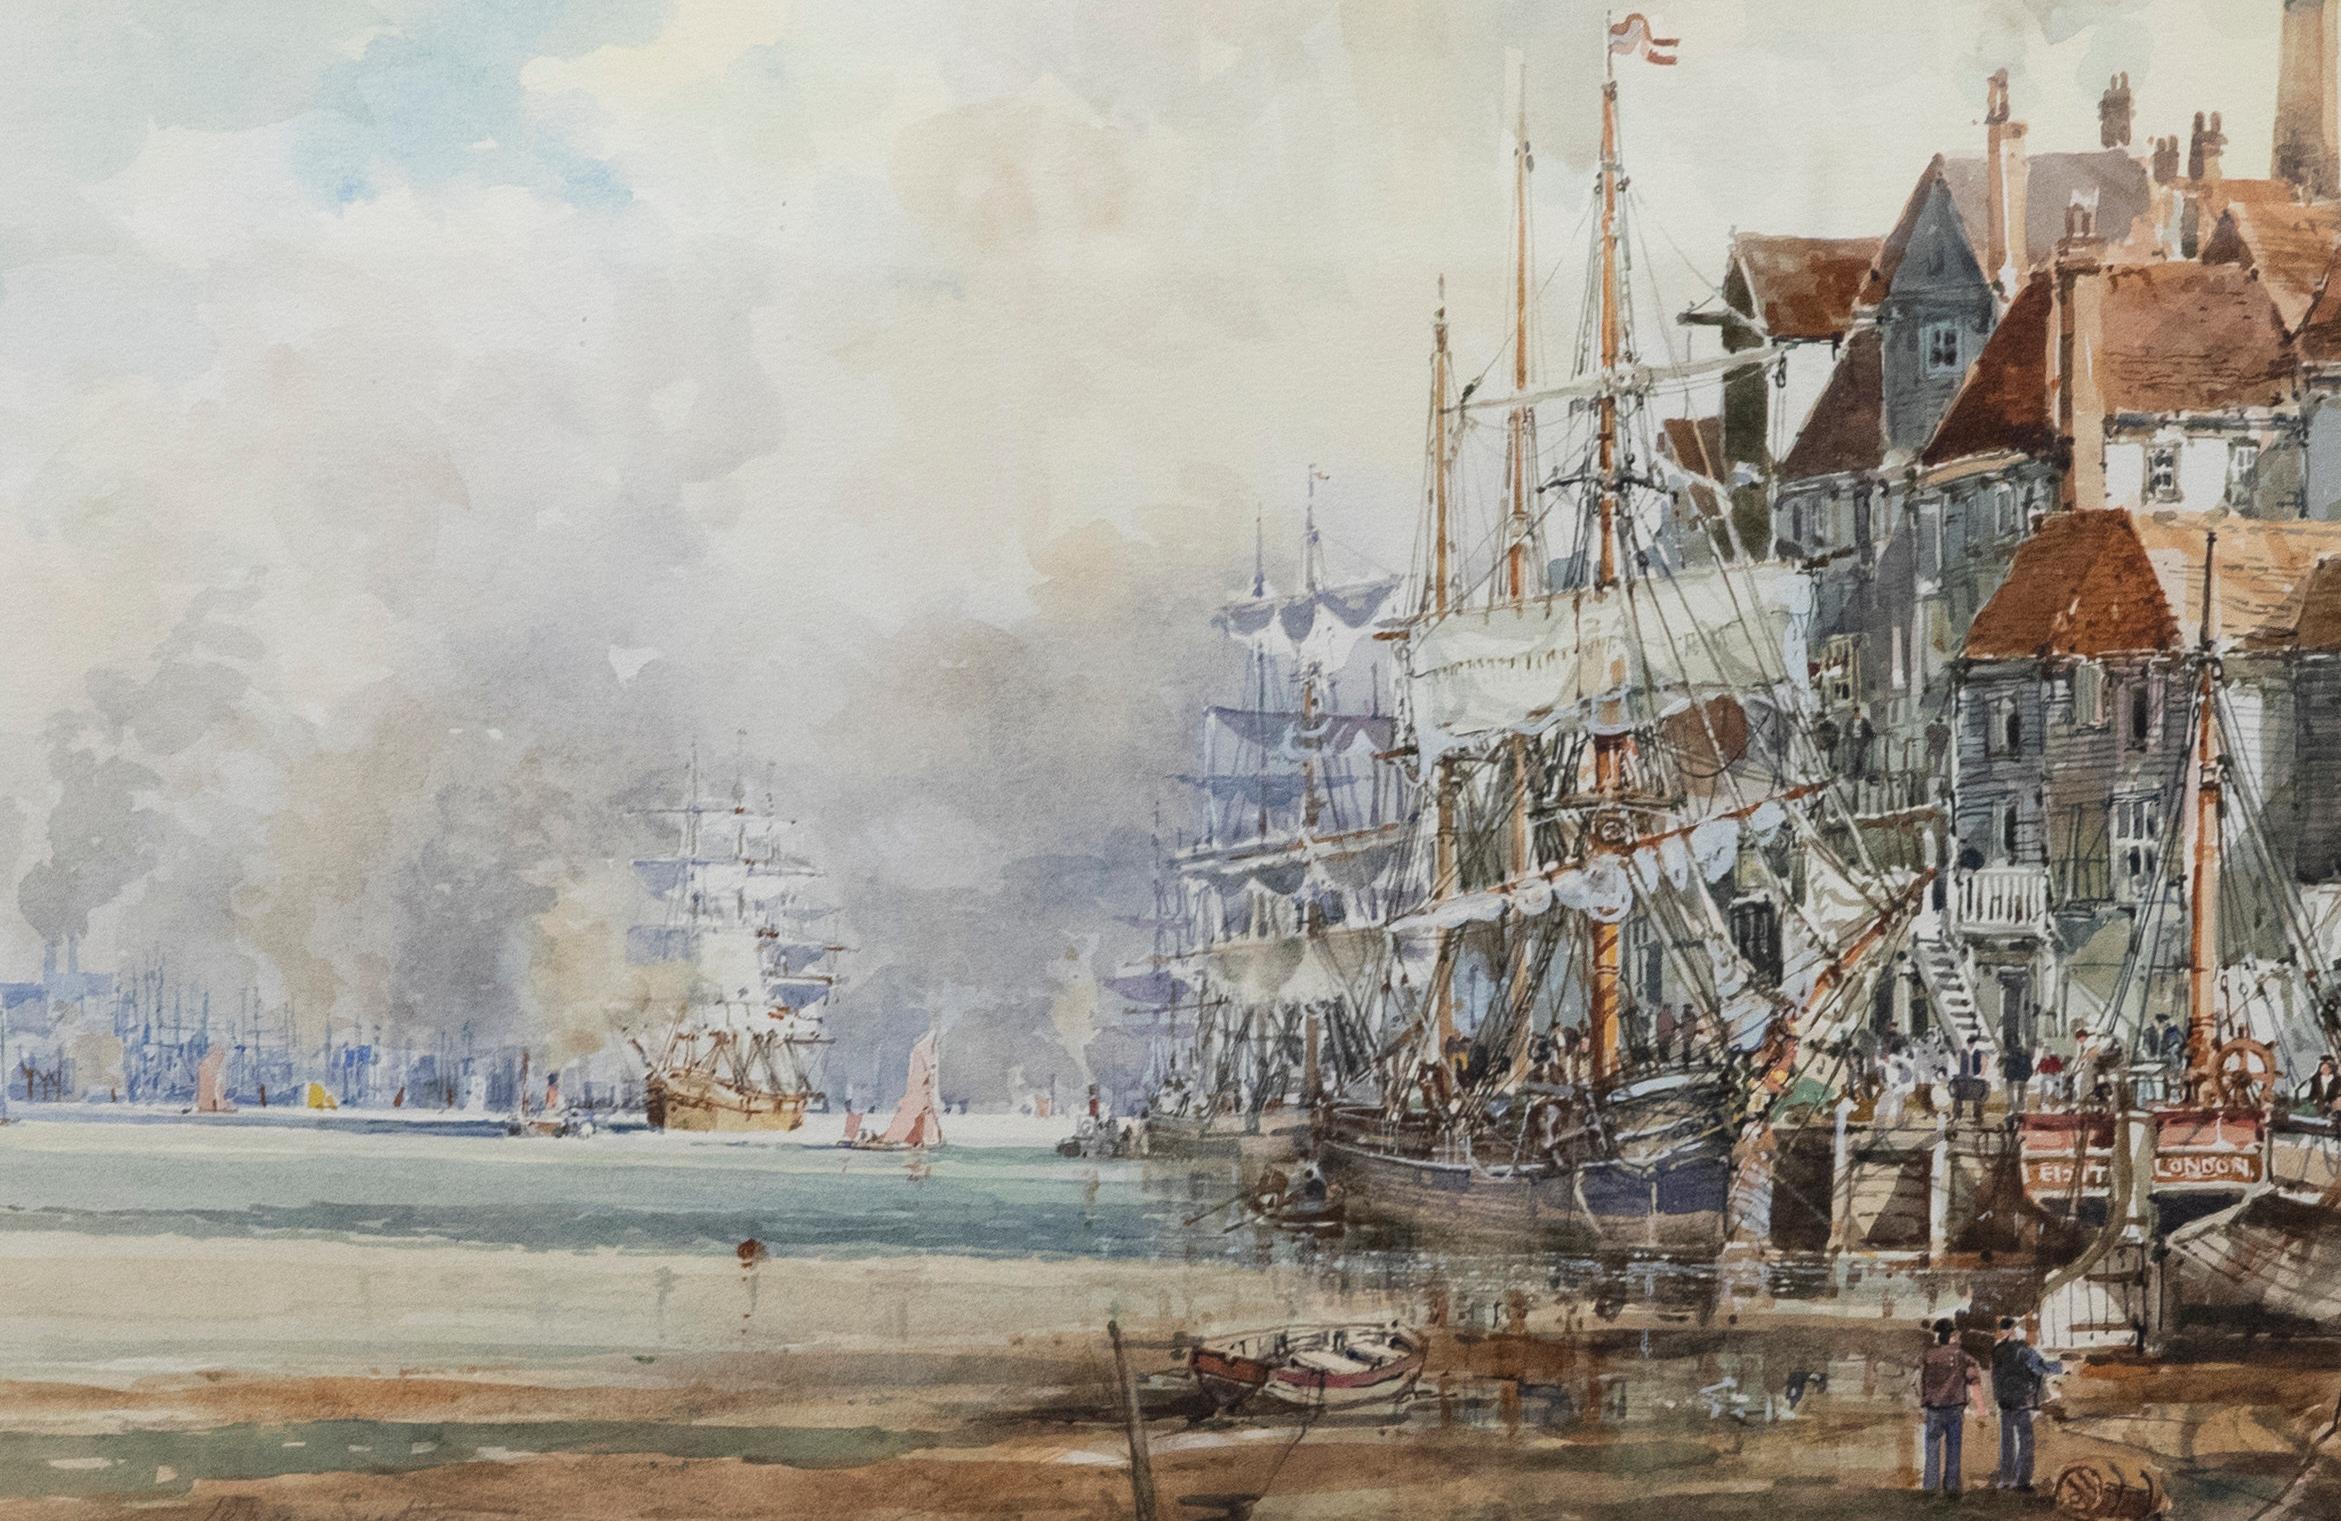 A dramatic and busy shipping port scene by the British marine and landscape artist John Sutton. Signed in pencil to the lower left edge. Well-presented in a fine gilt-effect frame with a crisp white mount. On watercolour paper.
